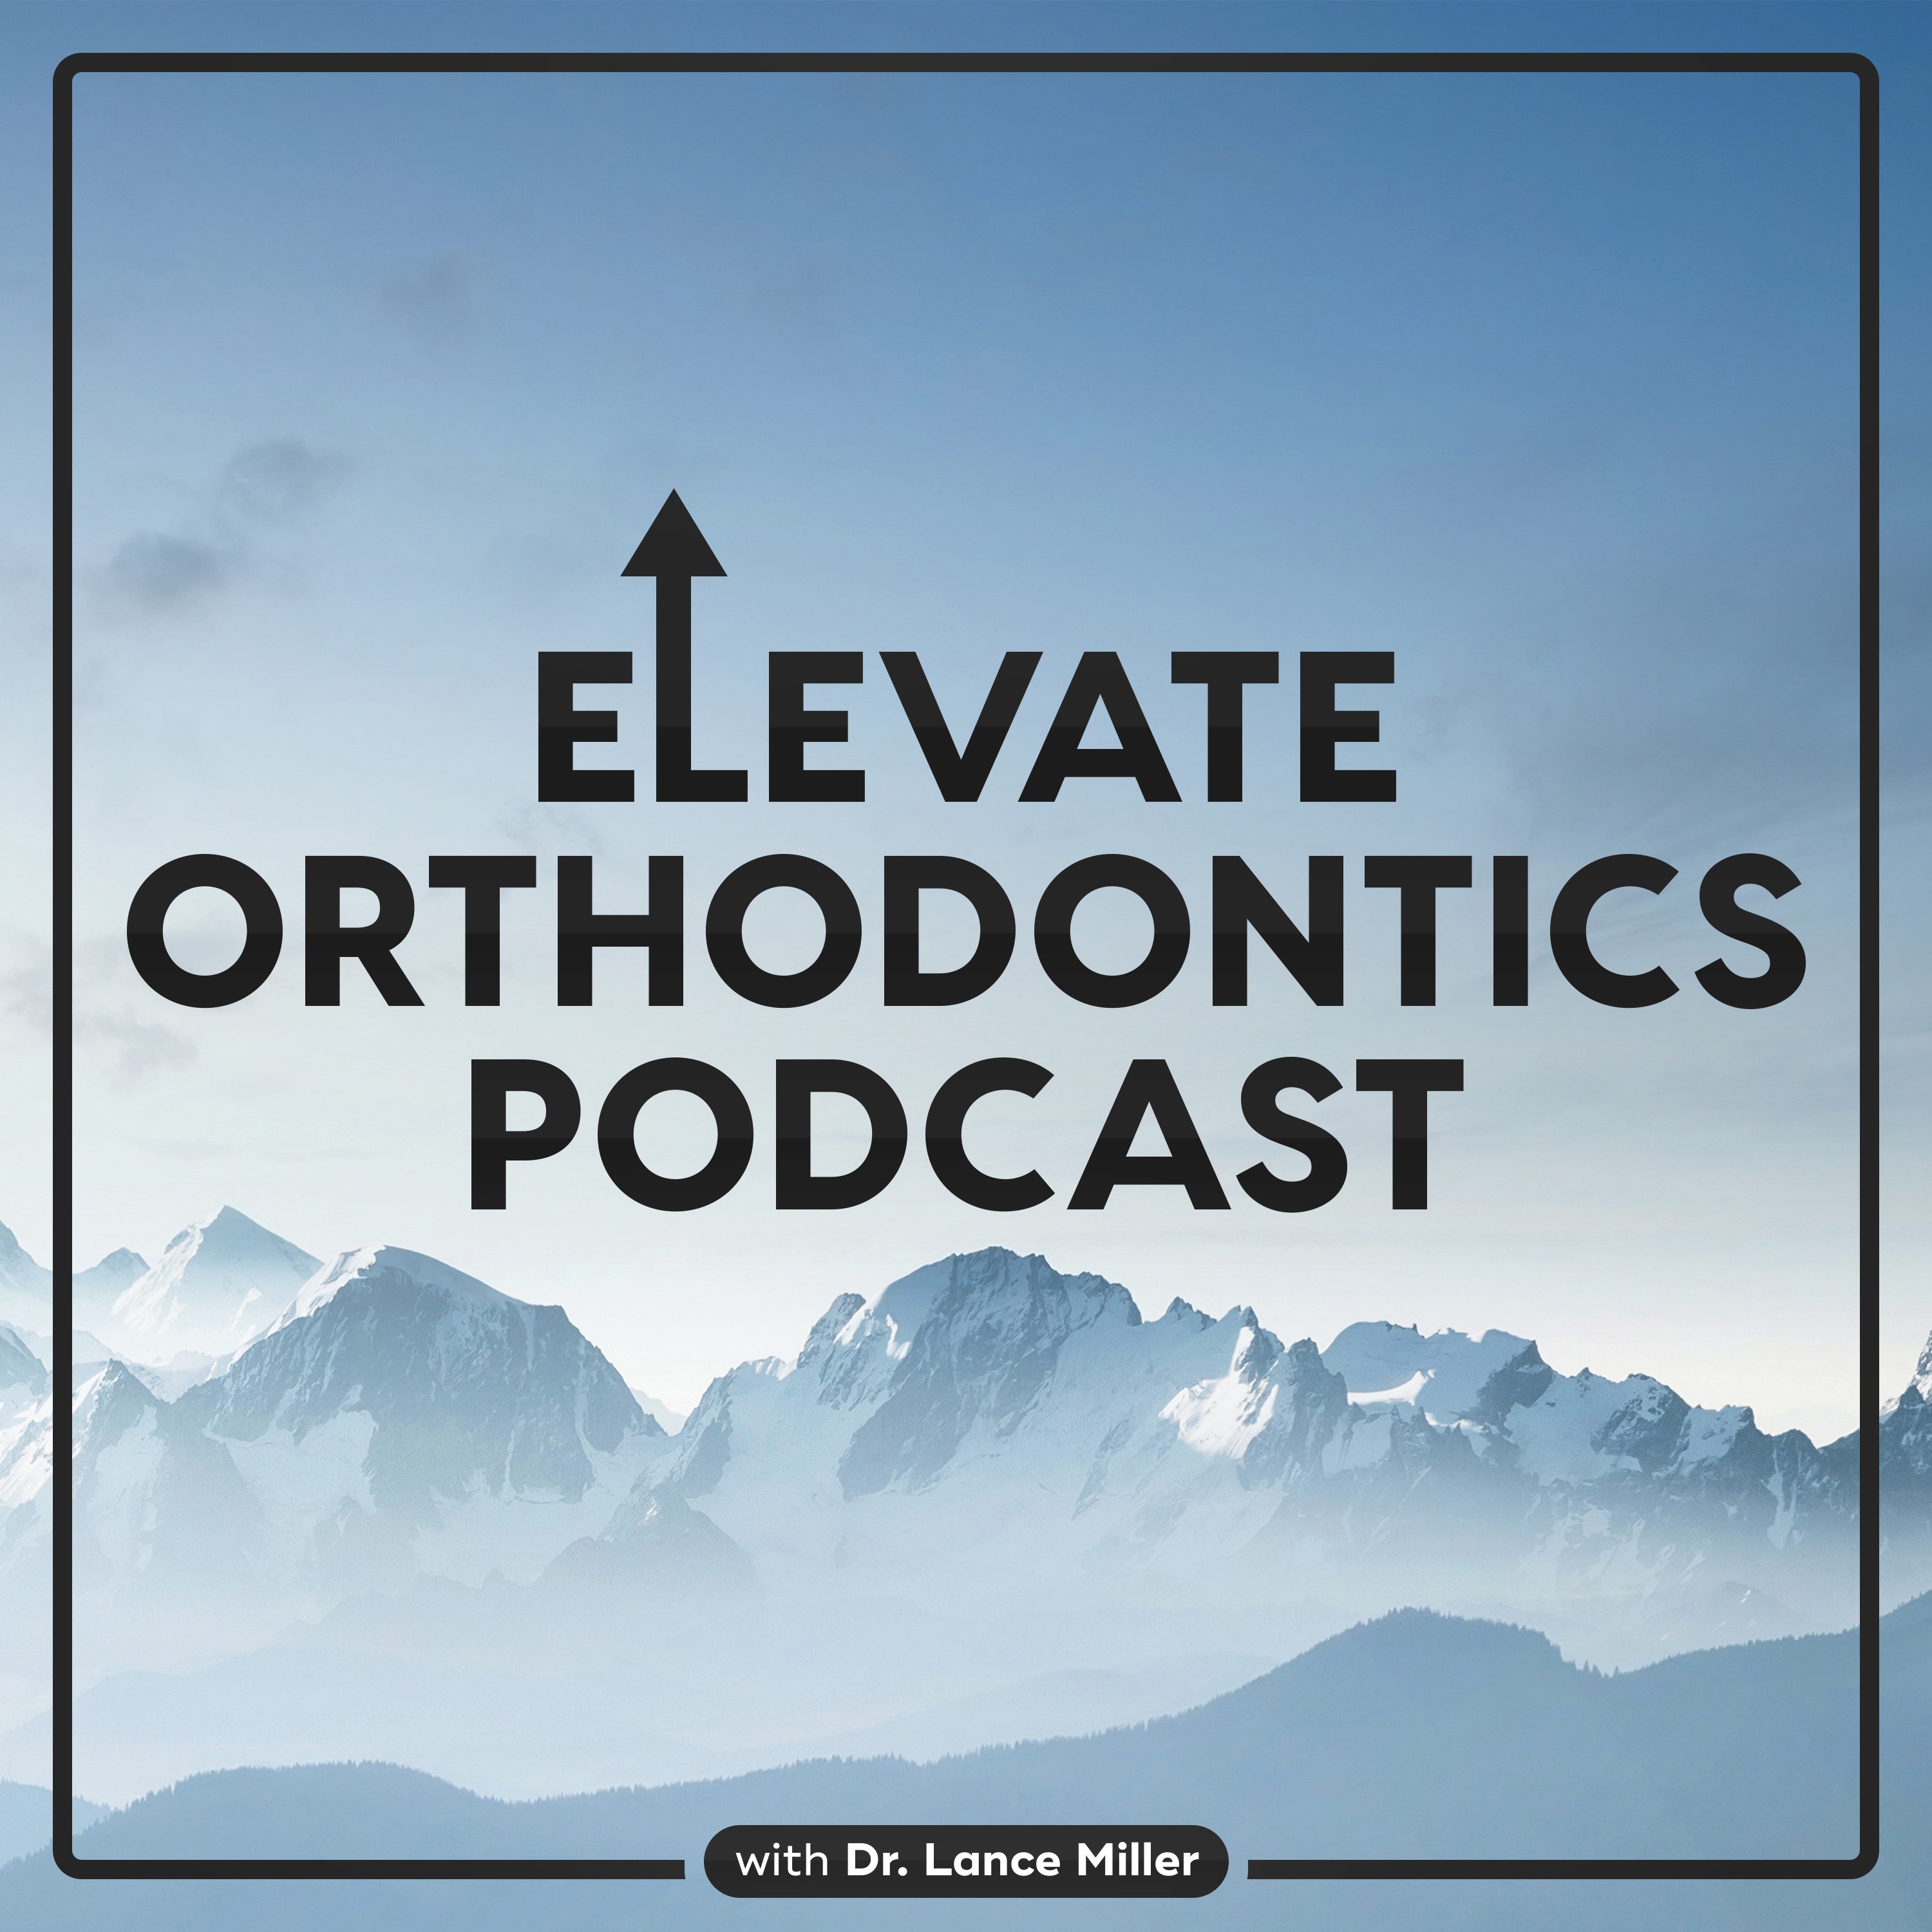 Elevate Orthodontics Podcast with Dr. Lance Miller